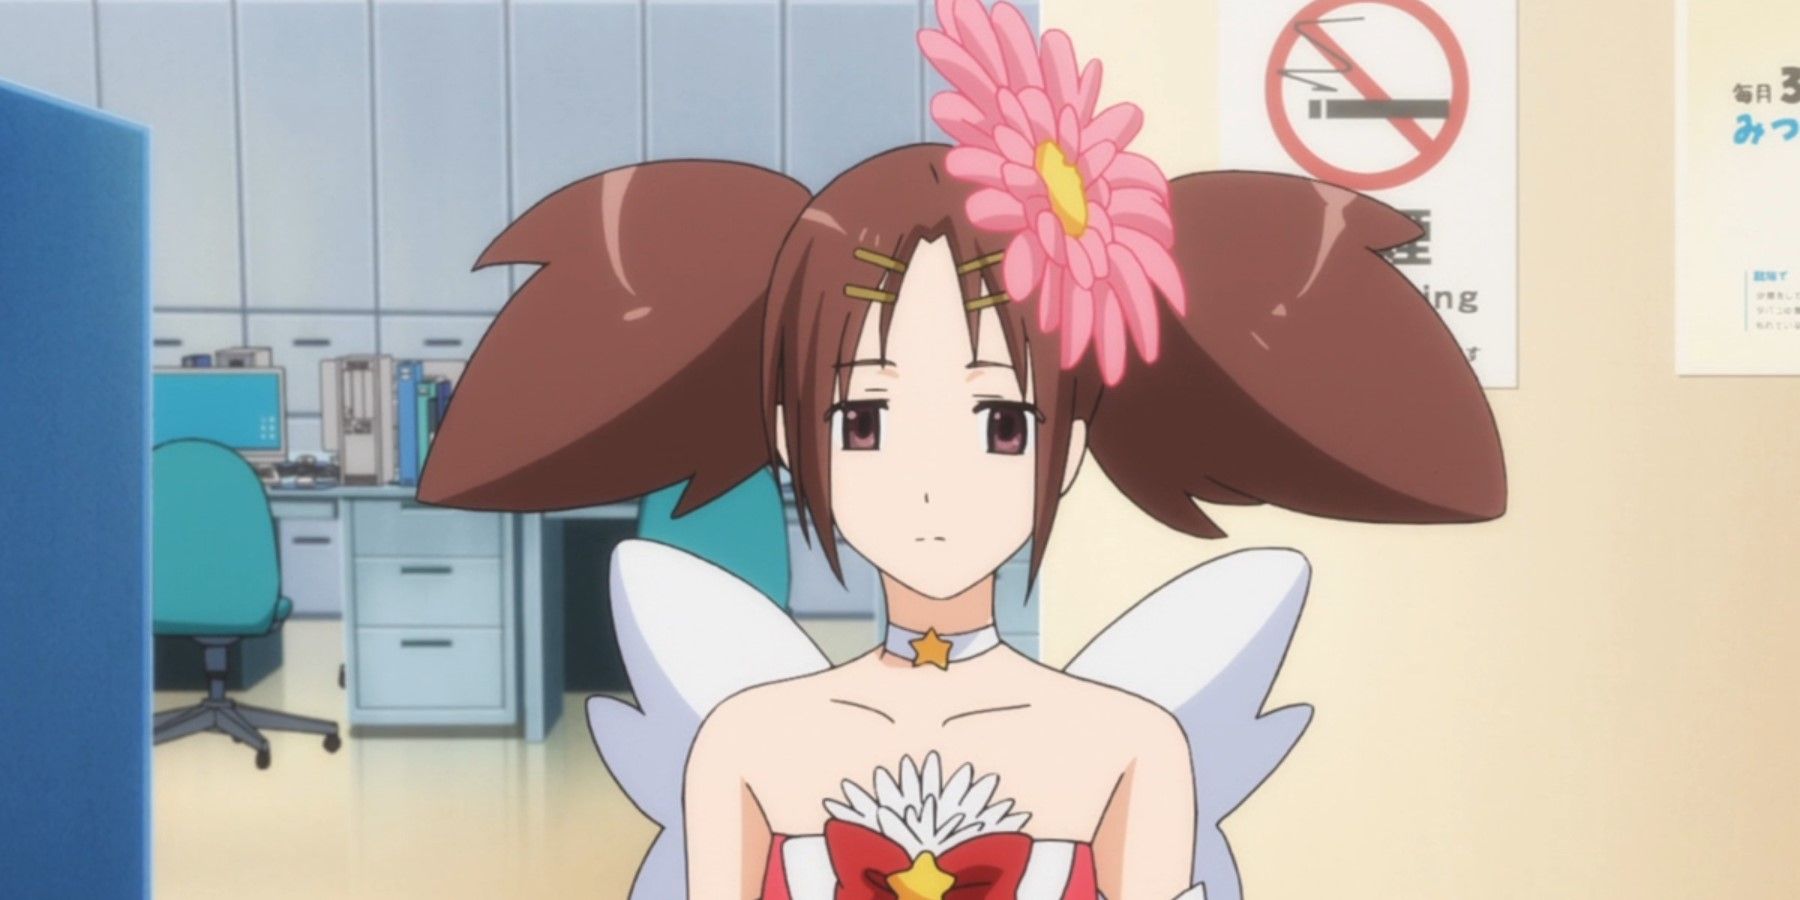 Megumi Chihaya in her Magical Flowers cosplay